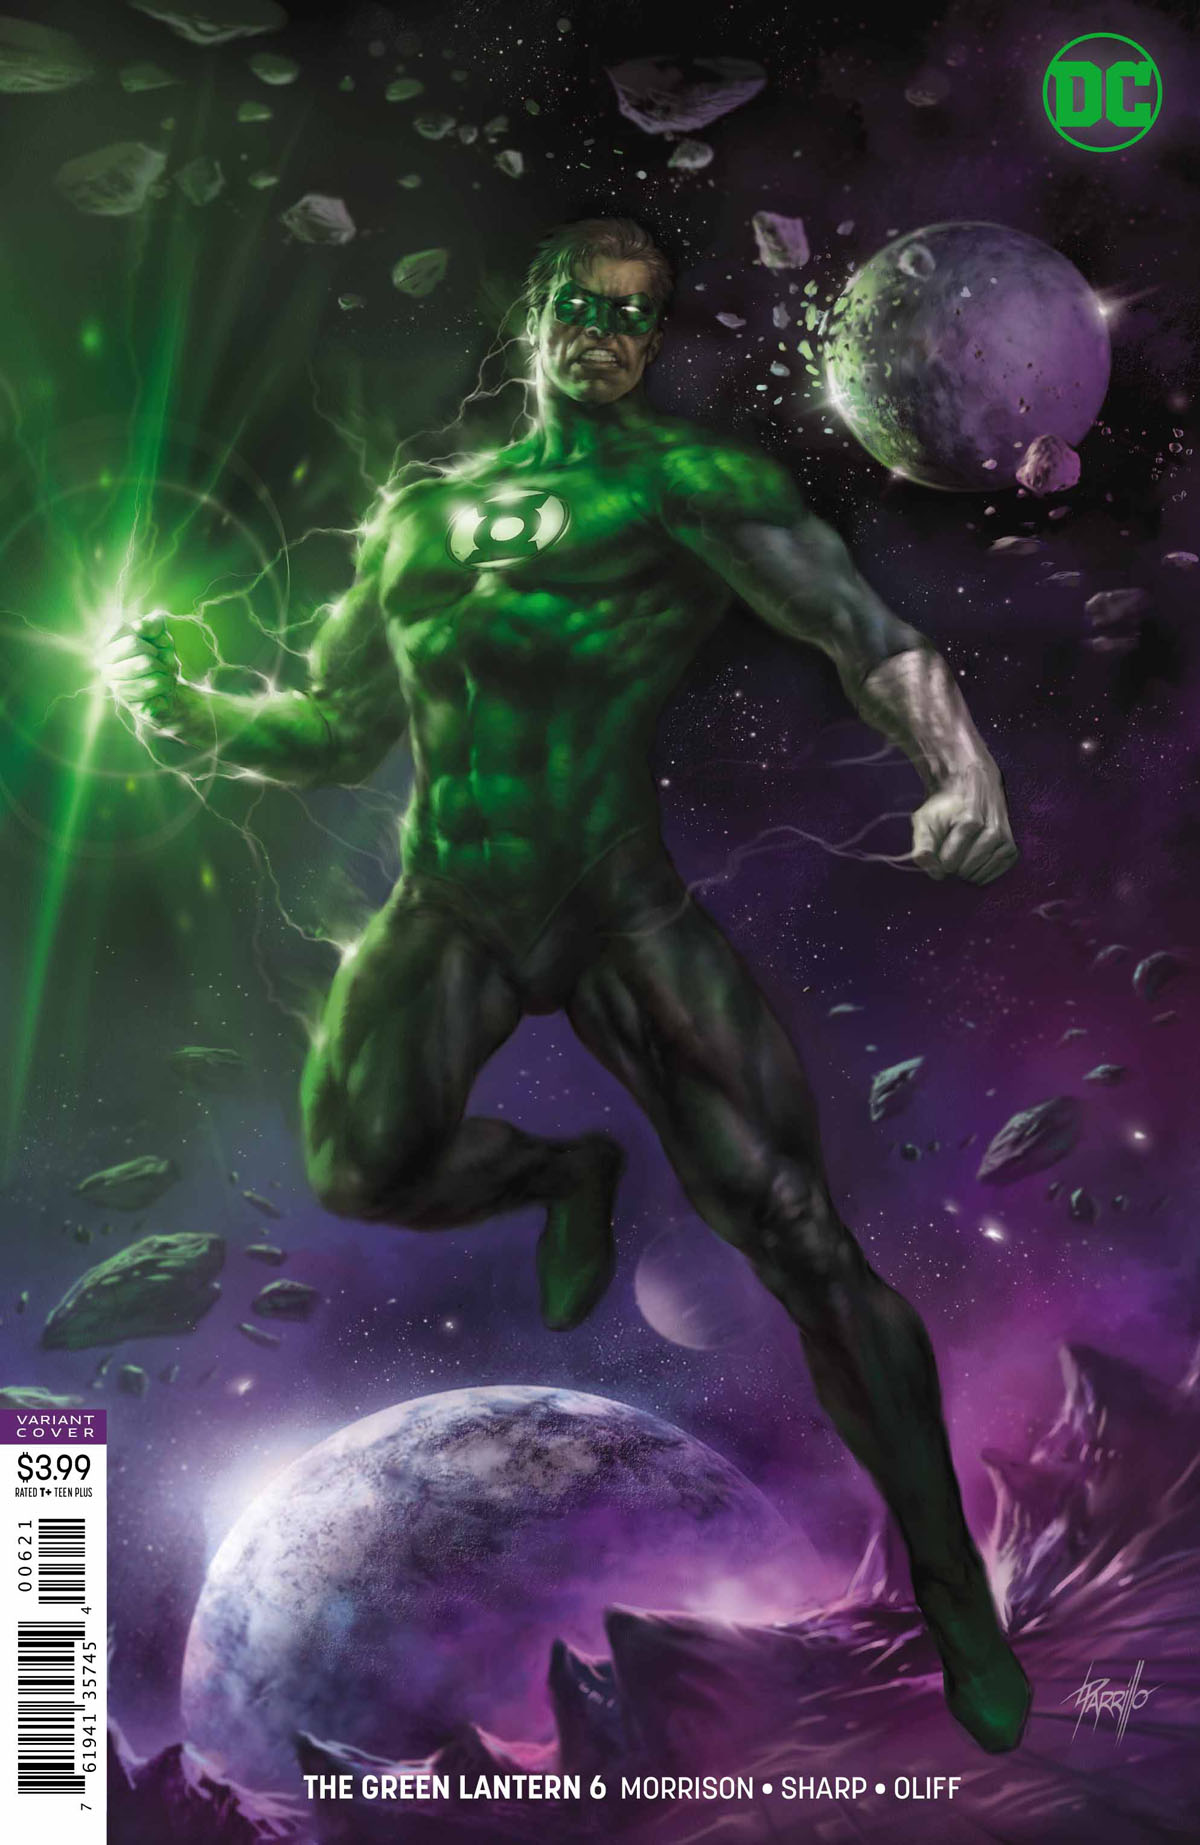 The Green Lantern #6 variant cover